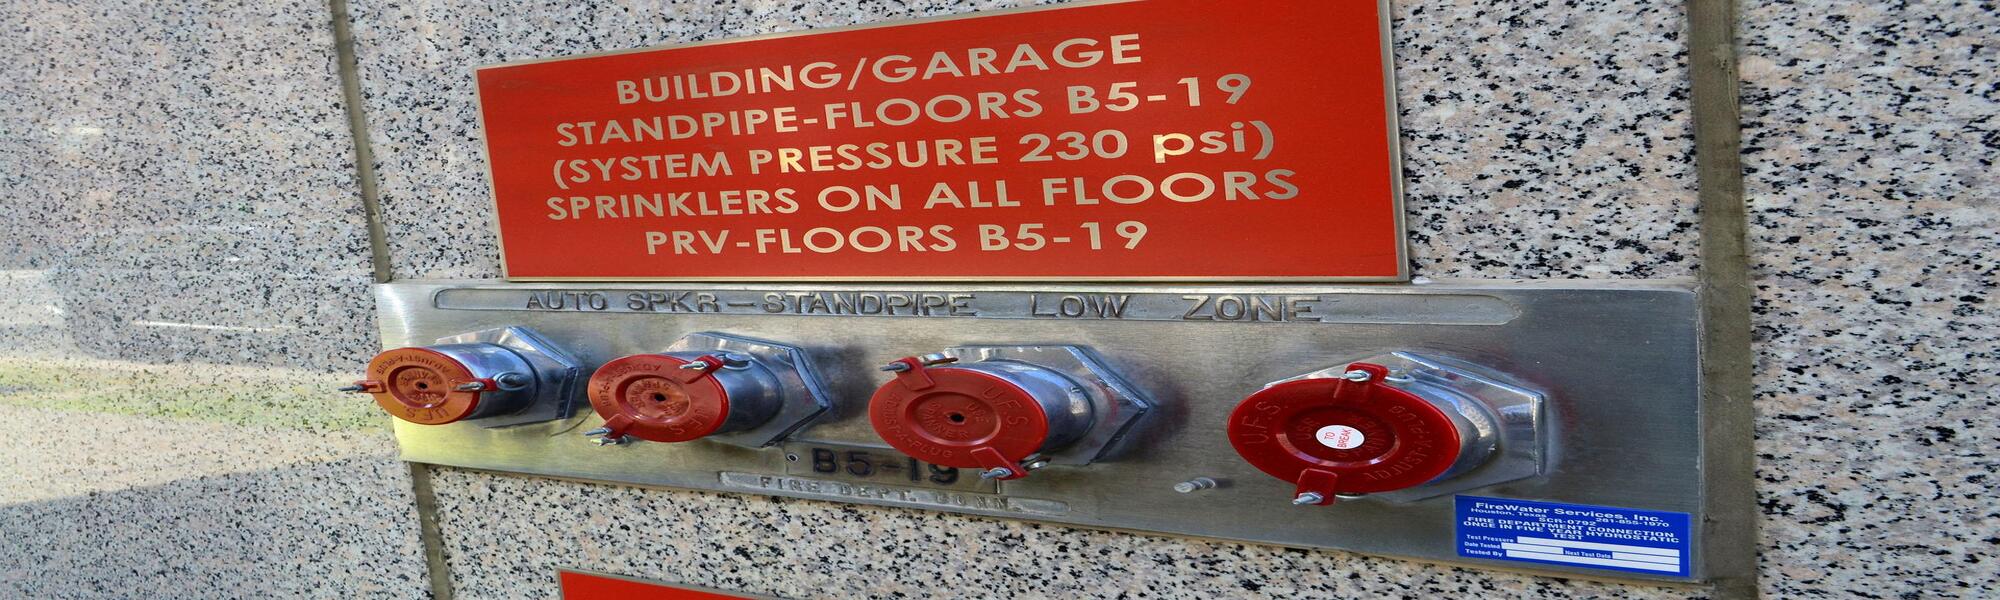 Why Fire Protection Systems in a Building is Important for your Business?
